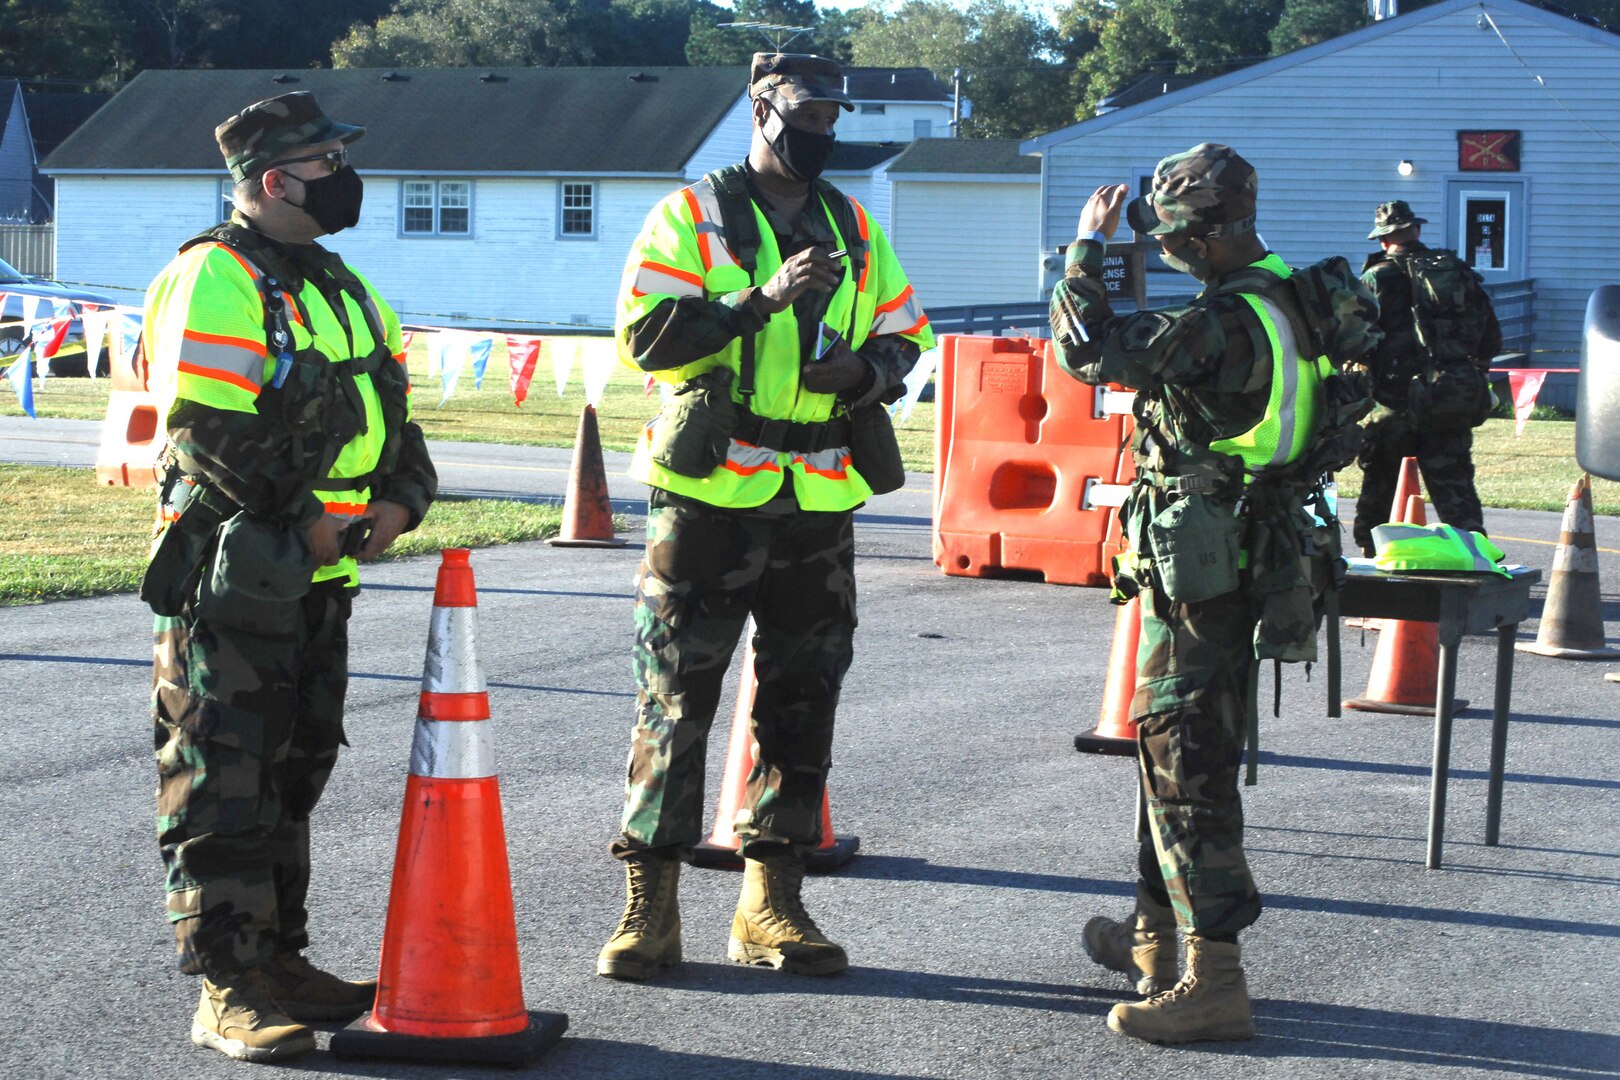 Virginia Defense Force conducts statewide readiness exercise